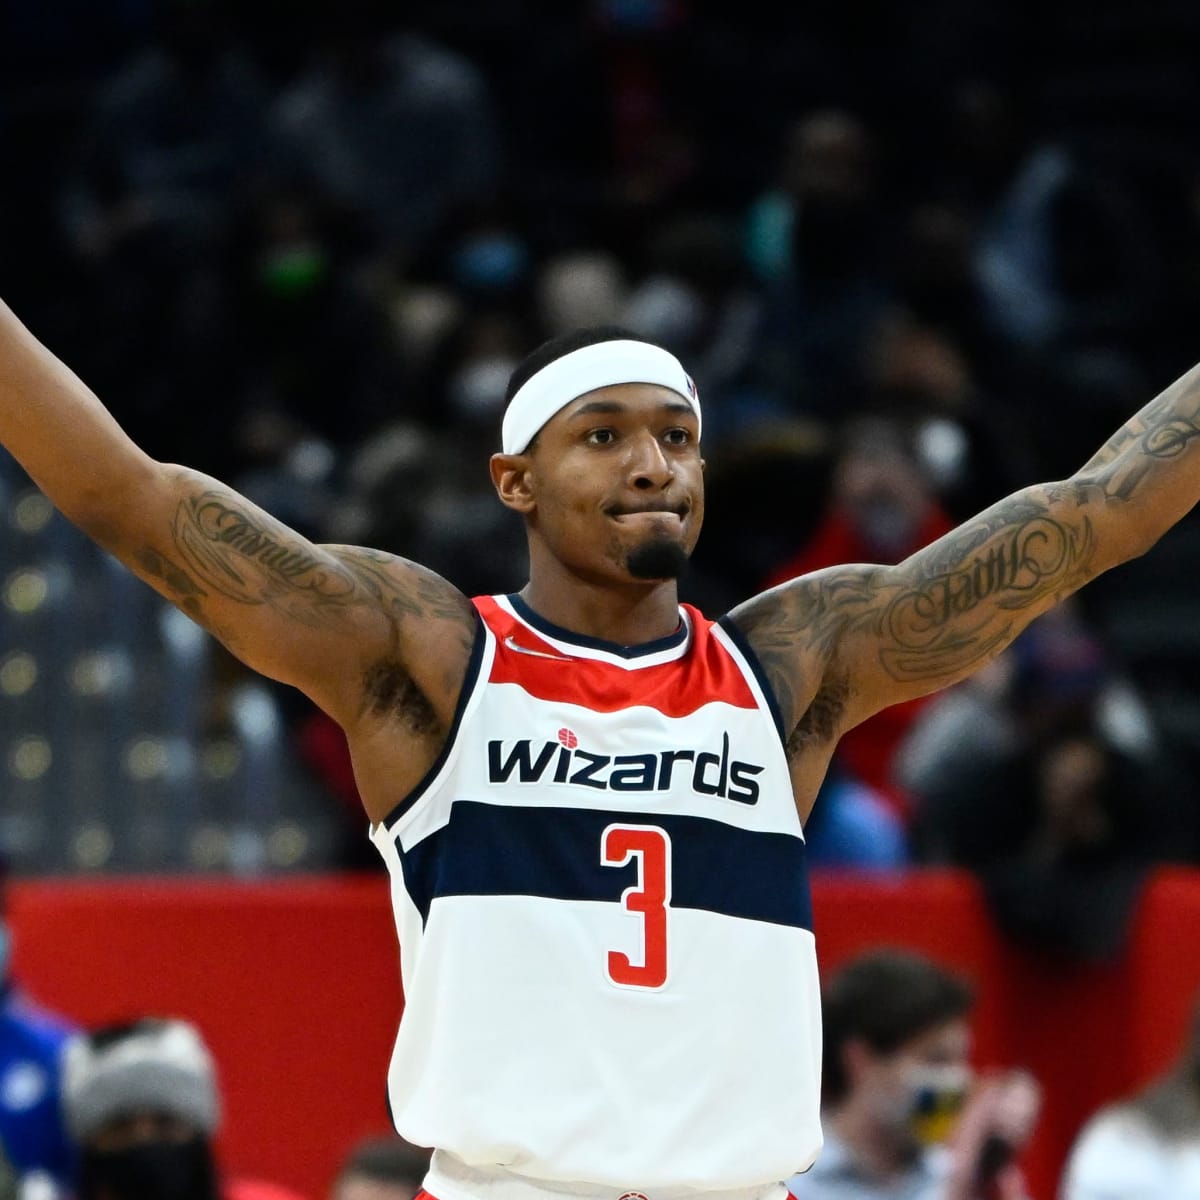 Bradley Beal sets dubious NBA record in Wizards' loss to Pelicans